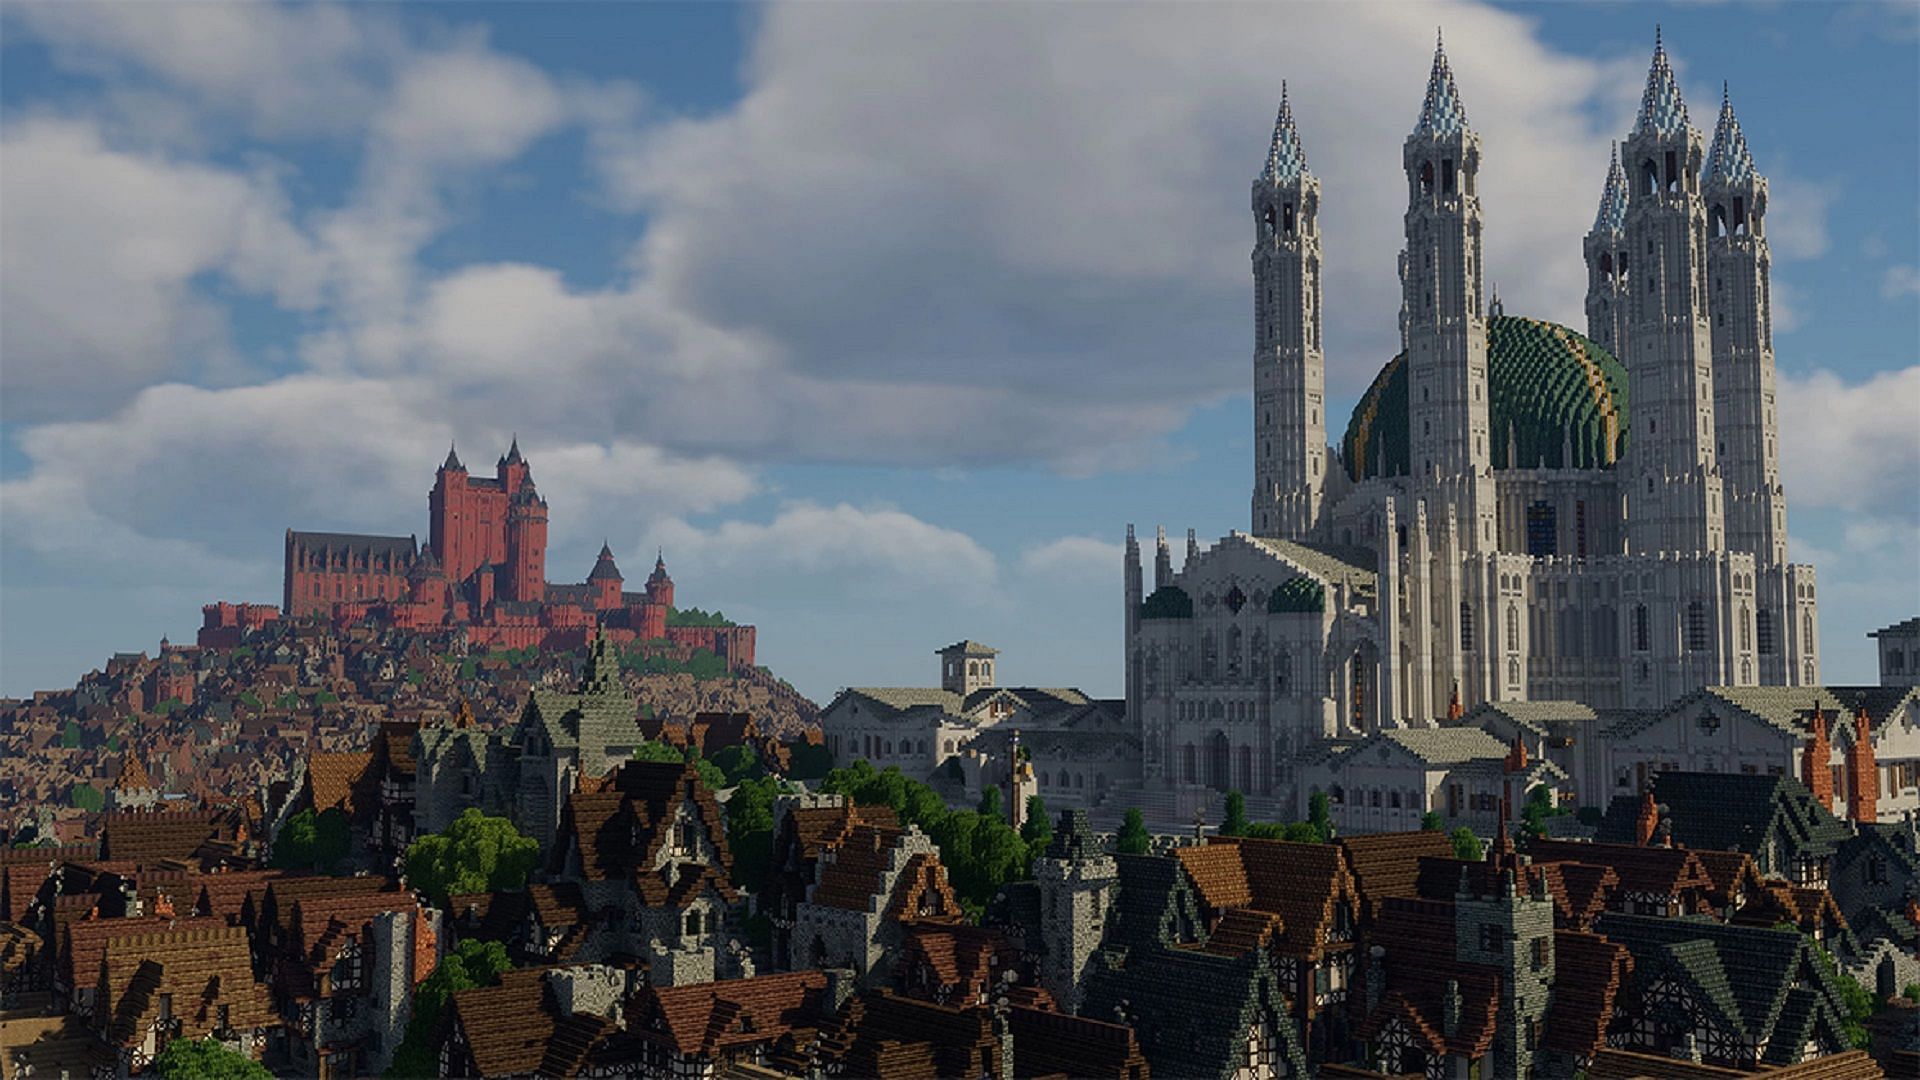 Minecraft player spends 12 years building Westeros from Game of Thrones 